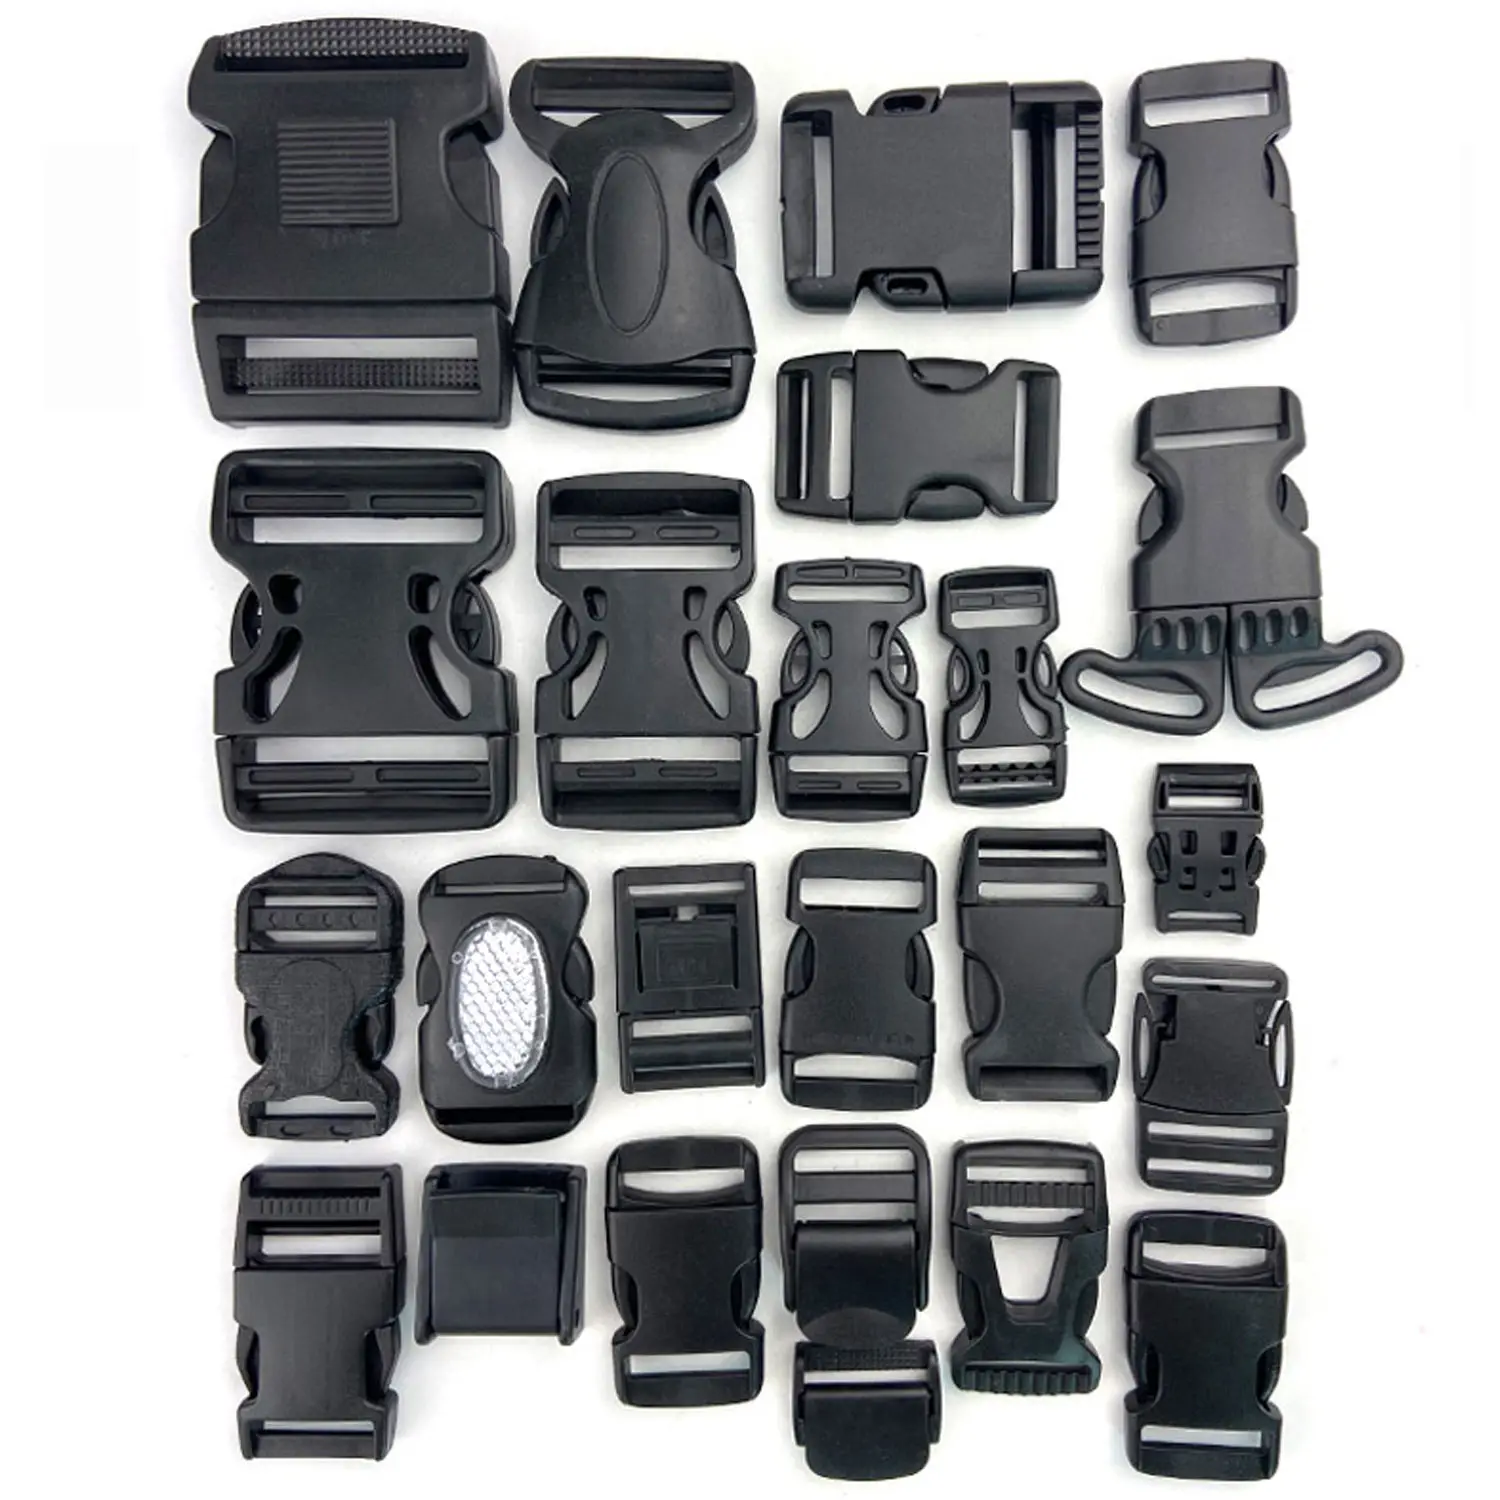 Eco-friendly black buckle plastic factory direct wholesale bag parts & accessories side release high quality plastic buckles